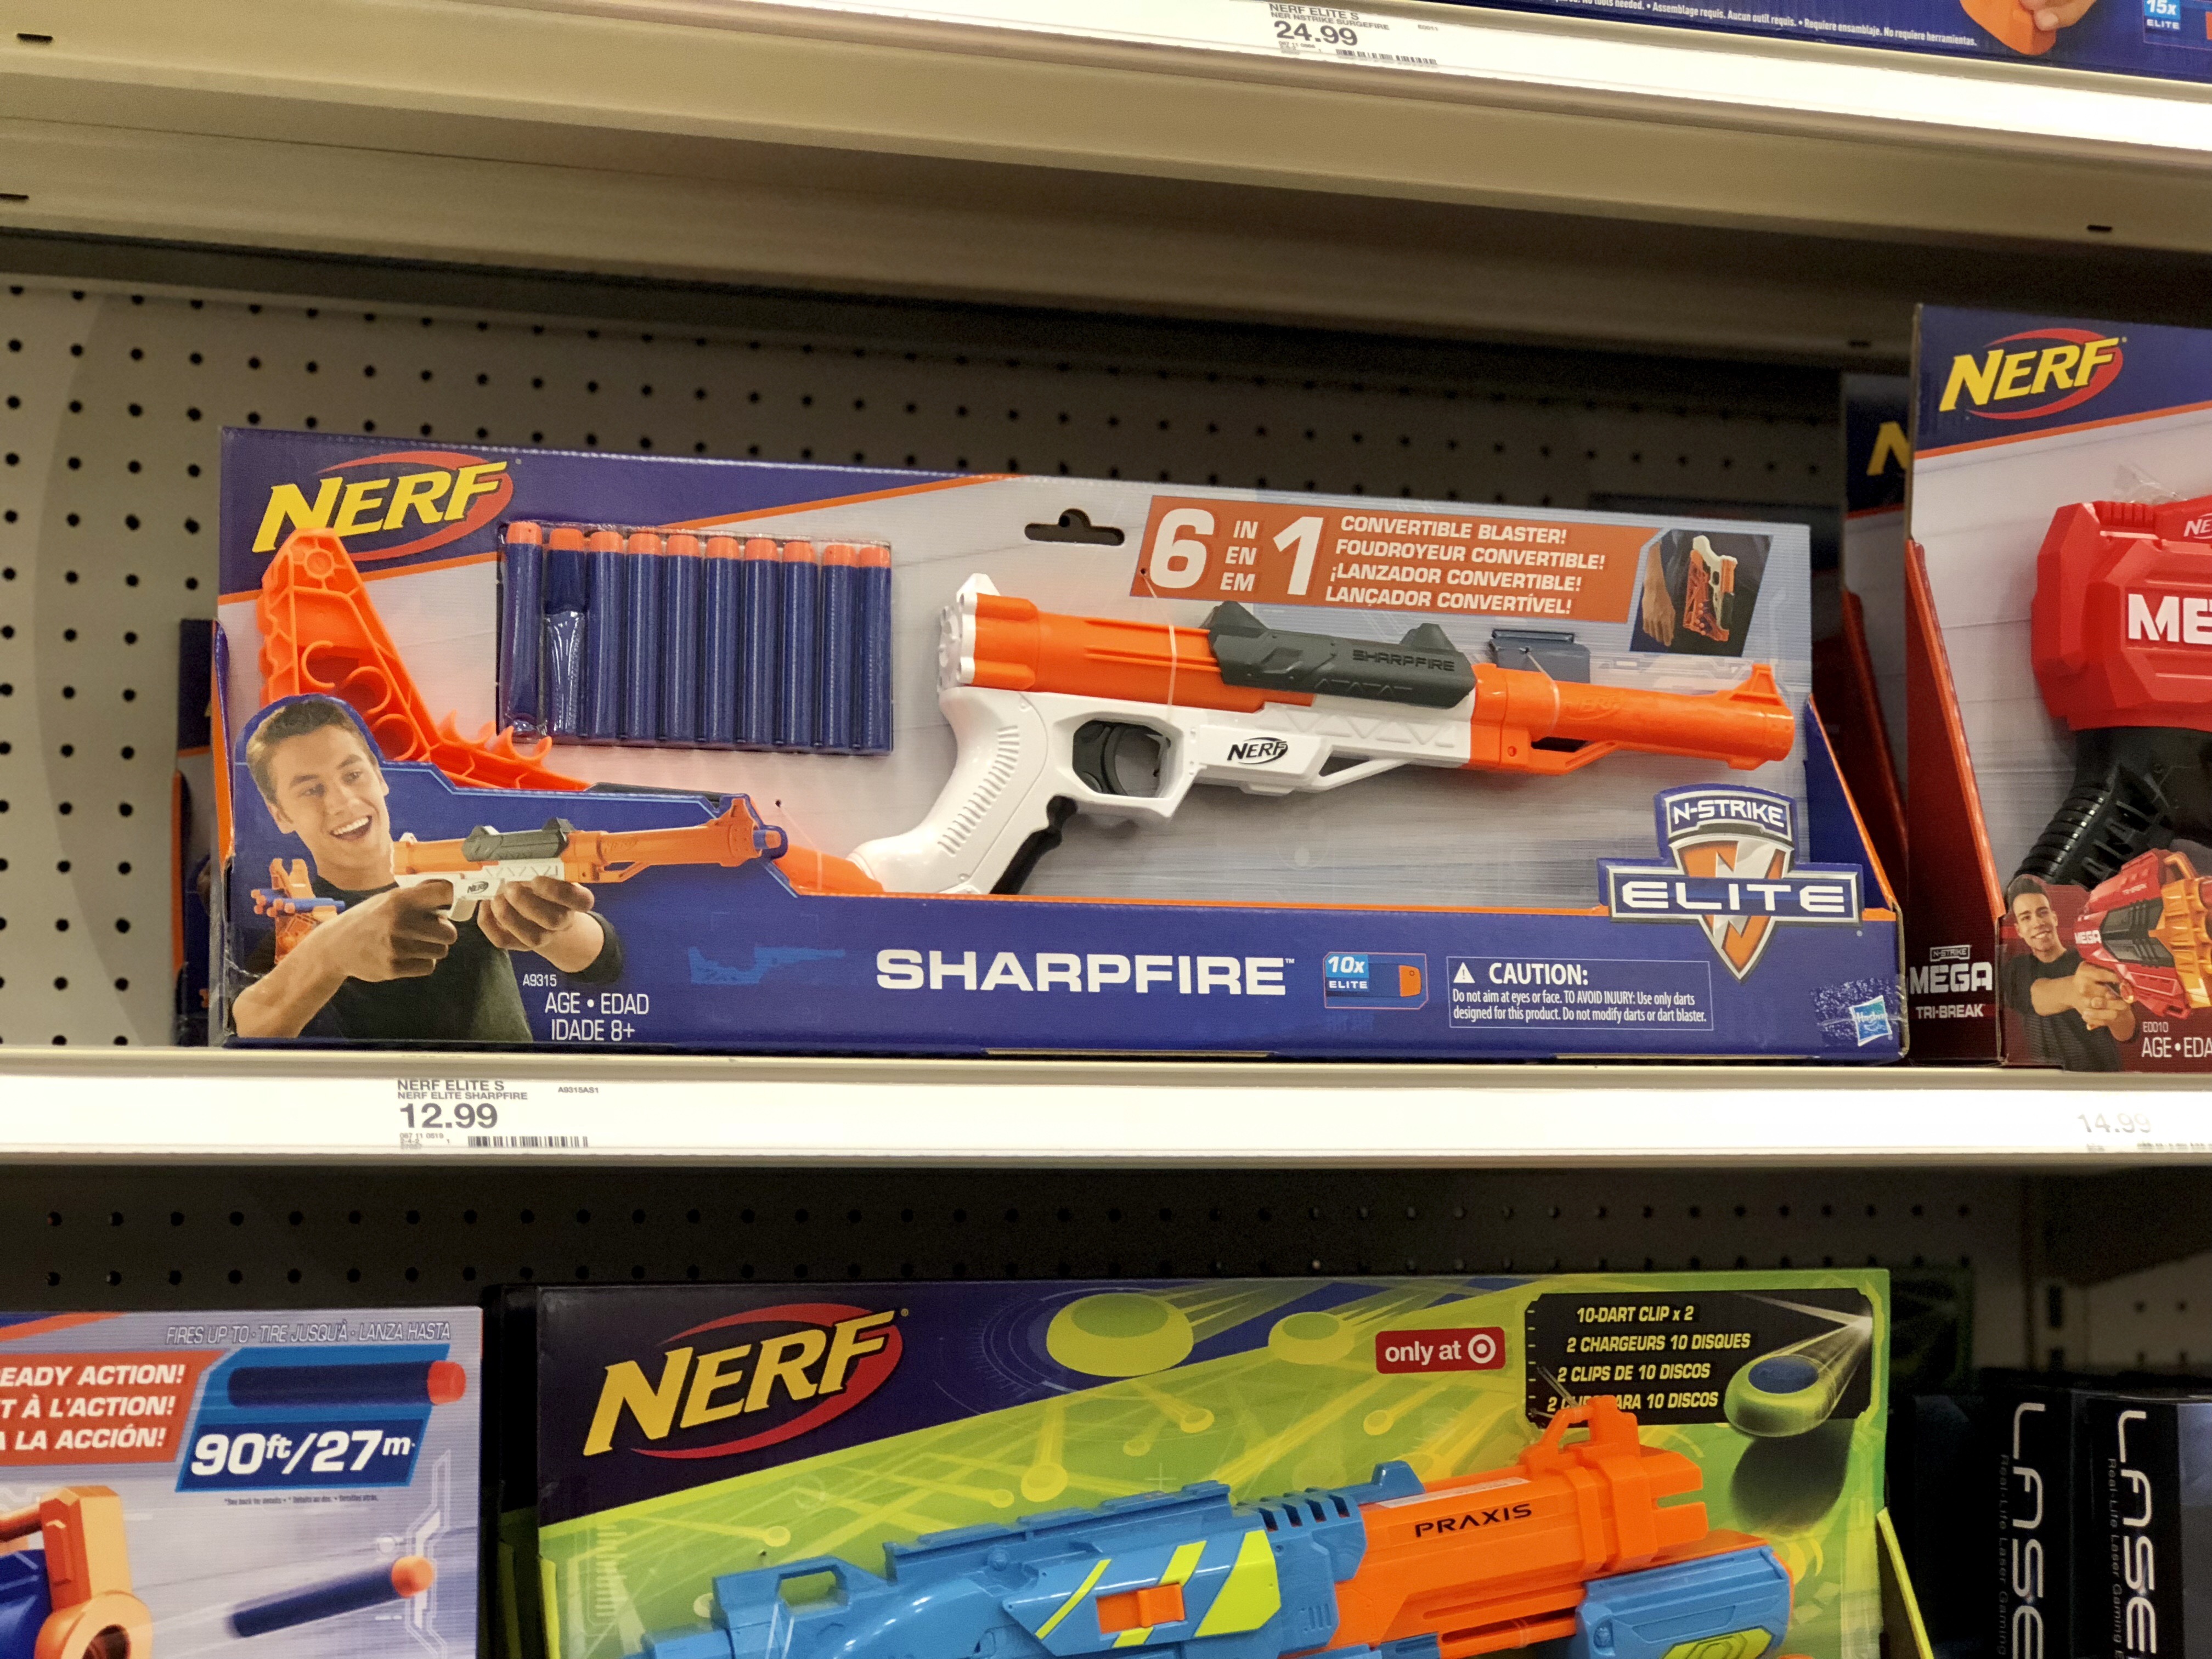 nerf buy one get one